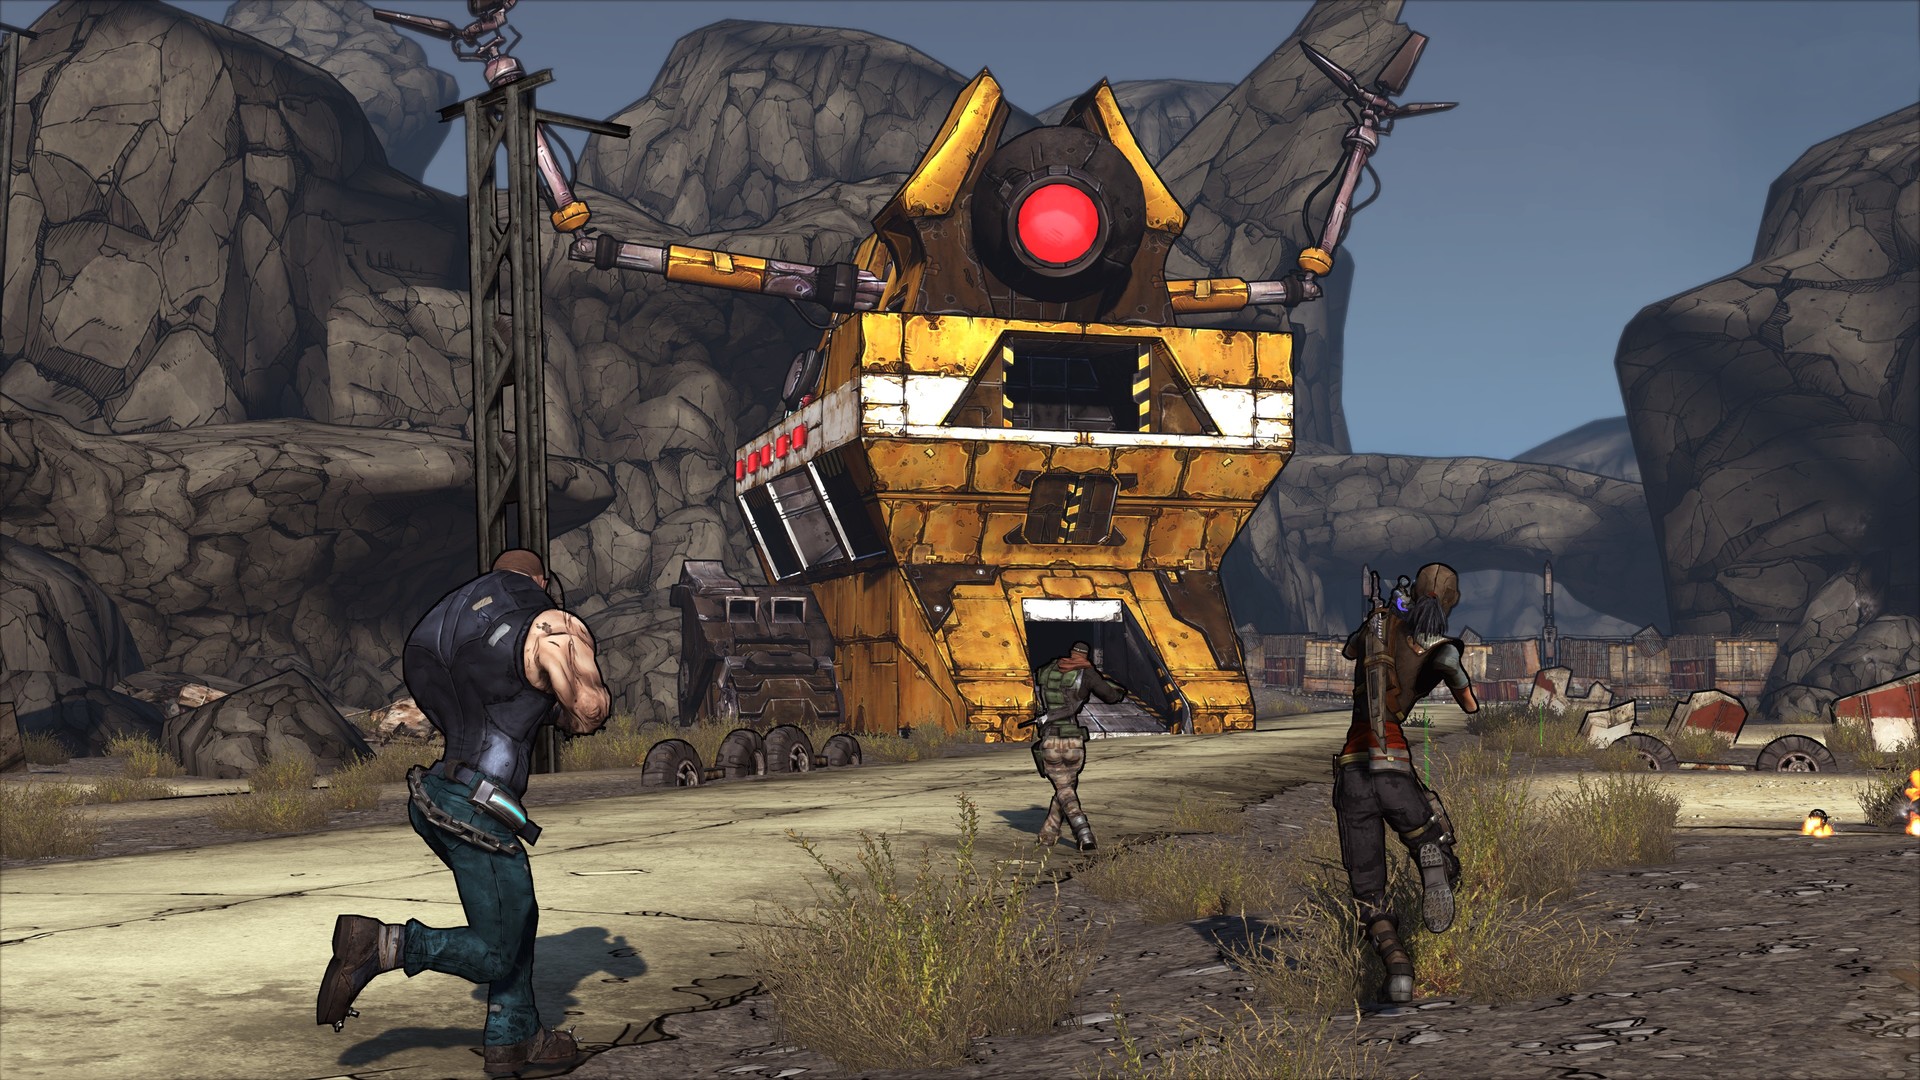 Borderlands for PC Review